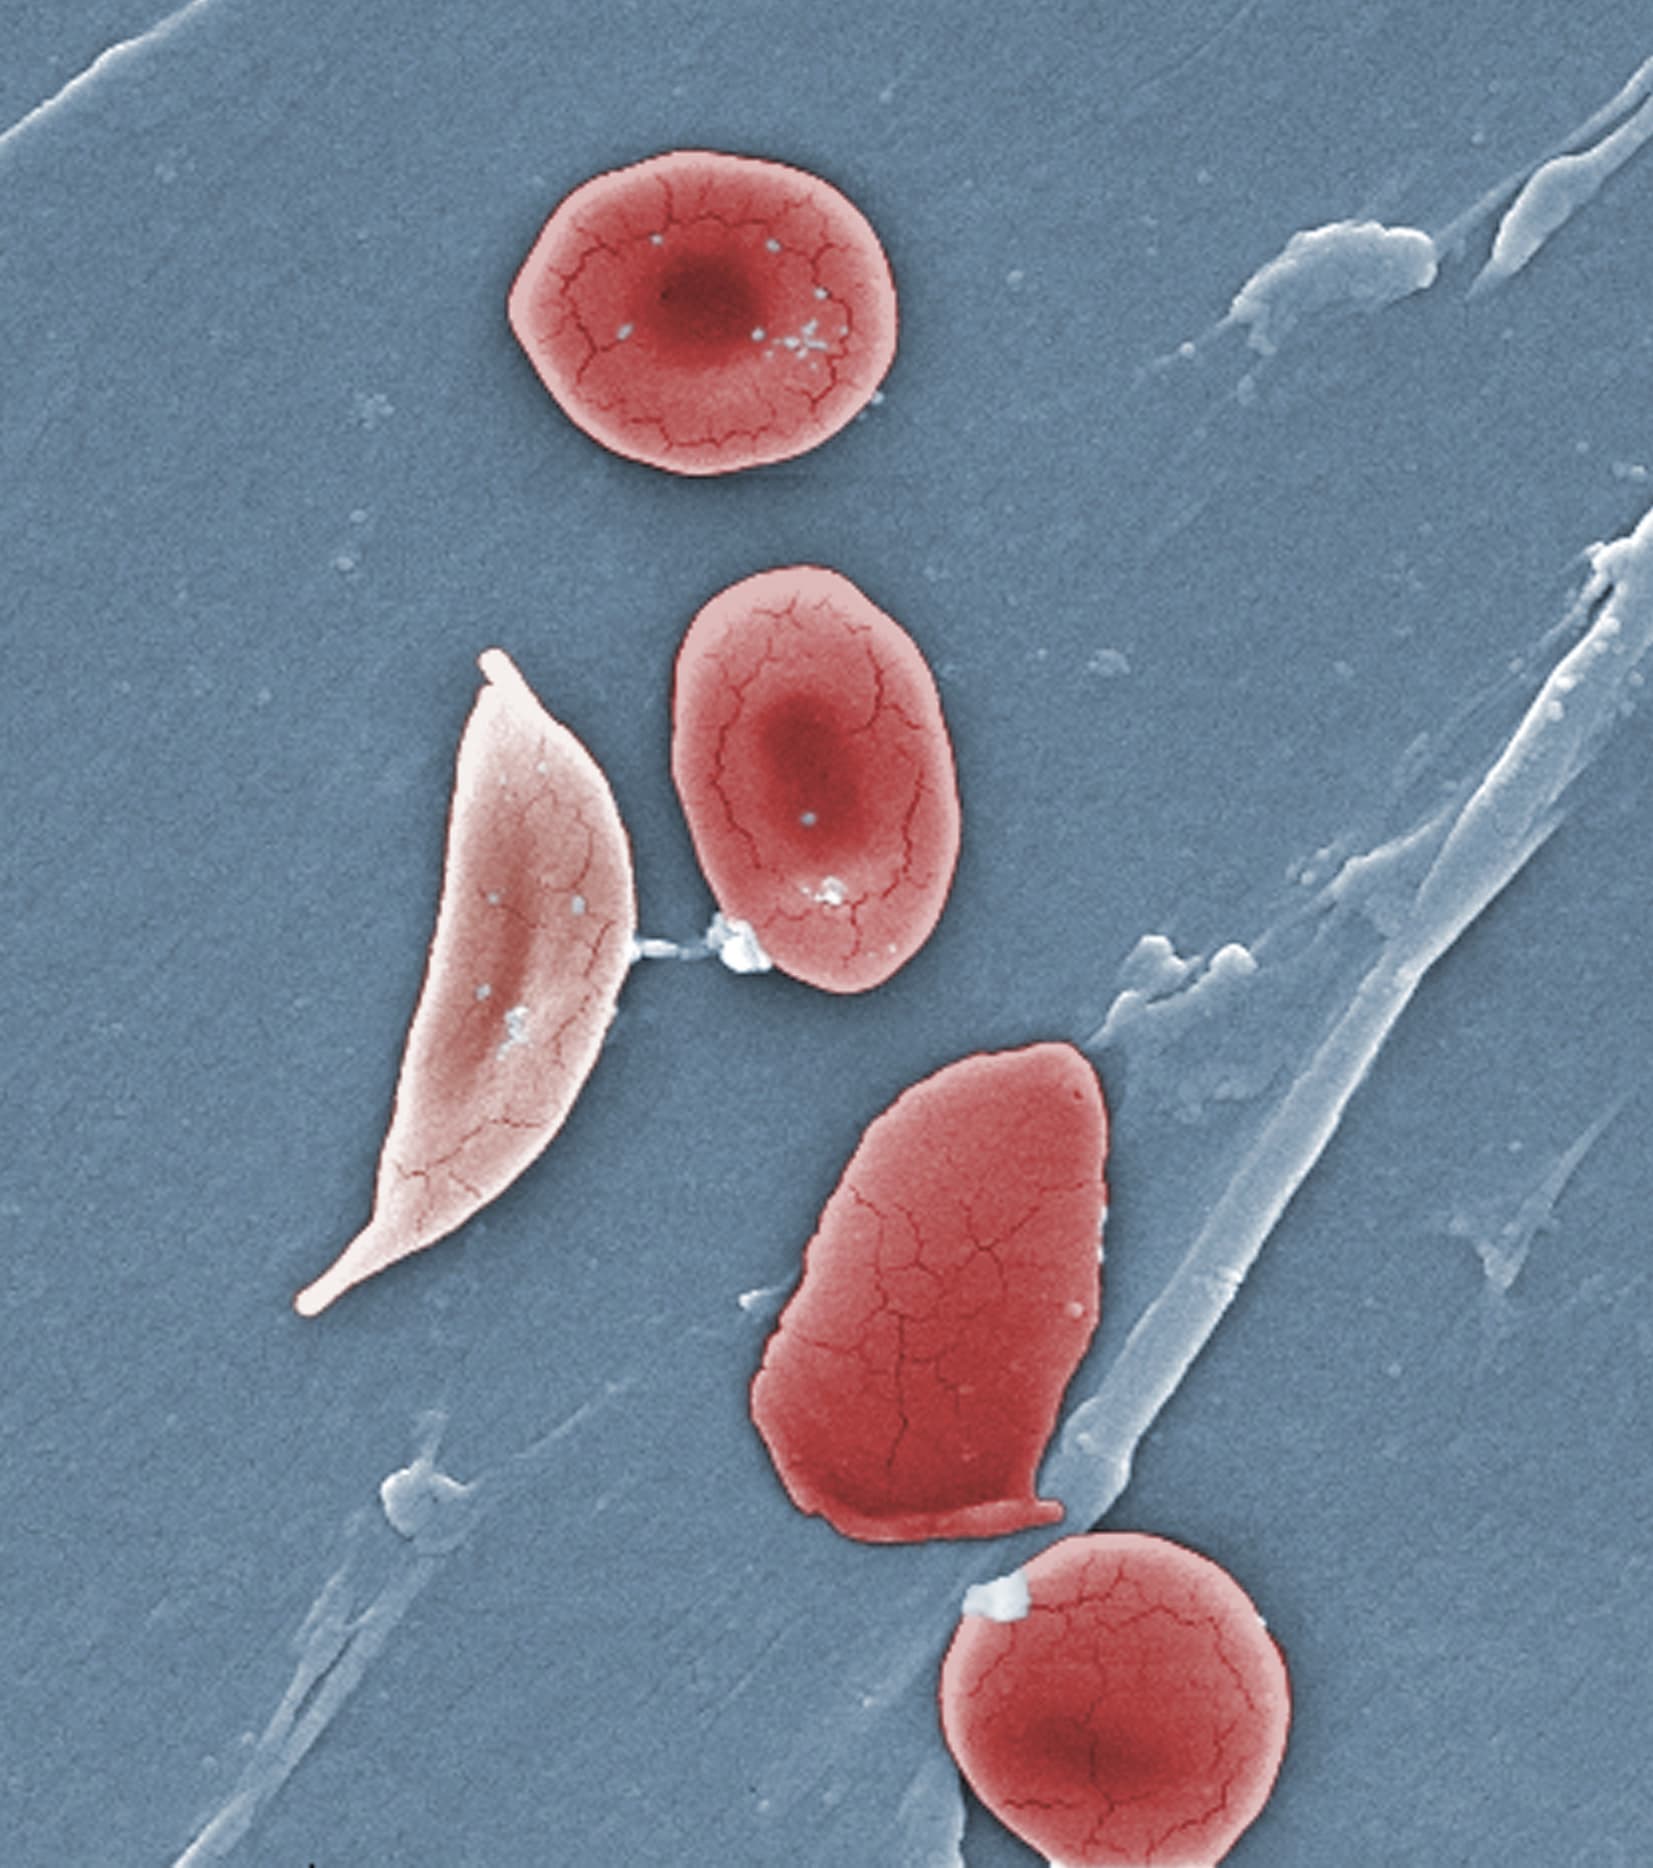 This 2009 colorized microscope image made available by the Sickle Cell Foundation of Georgia via the Centers for Disease Control and Prevention shows a sickle cell, left, and normal red blood cells of a patient with sickle cell anemia. (Janice Haney Carr/CDC/Sickle Cell Foundation of Georgia via AP)